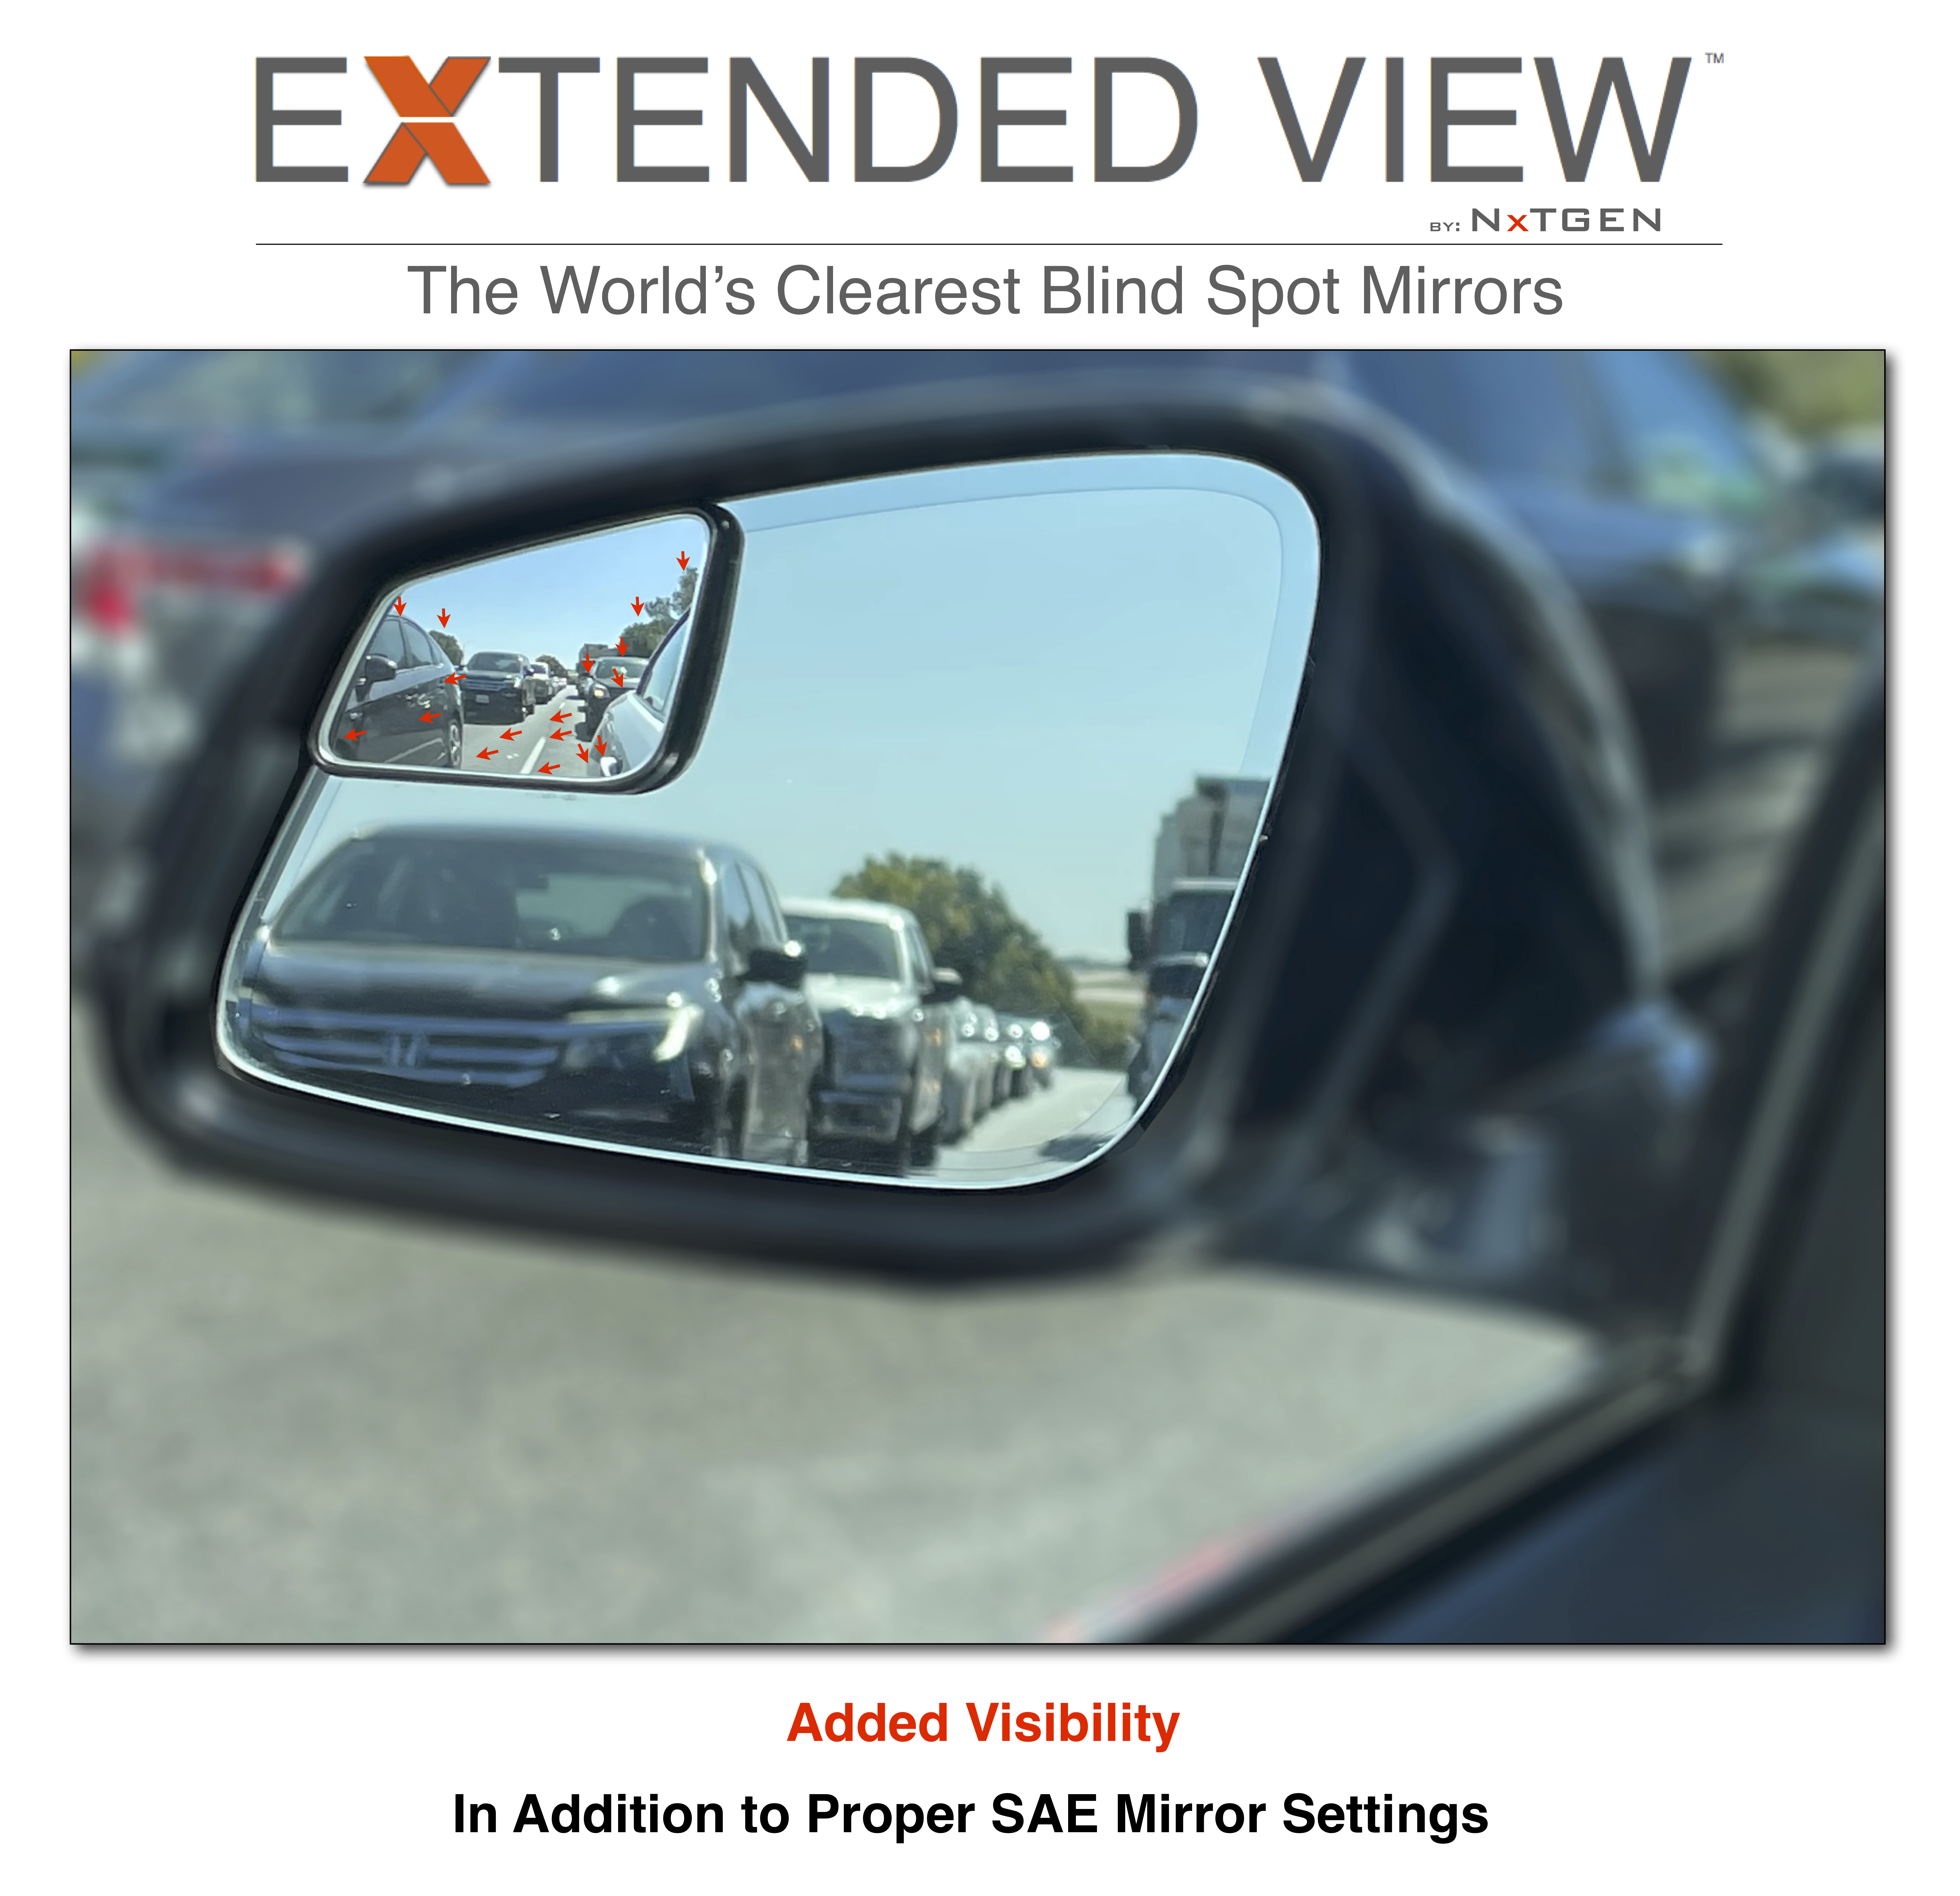 BMW 4 Series Blind Spot Mirrors | F33 Extended View™